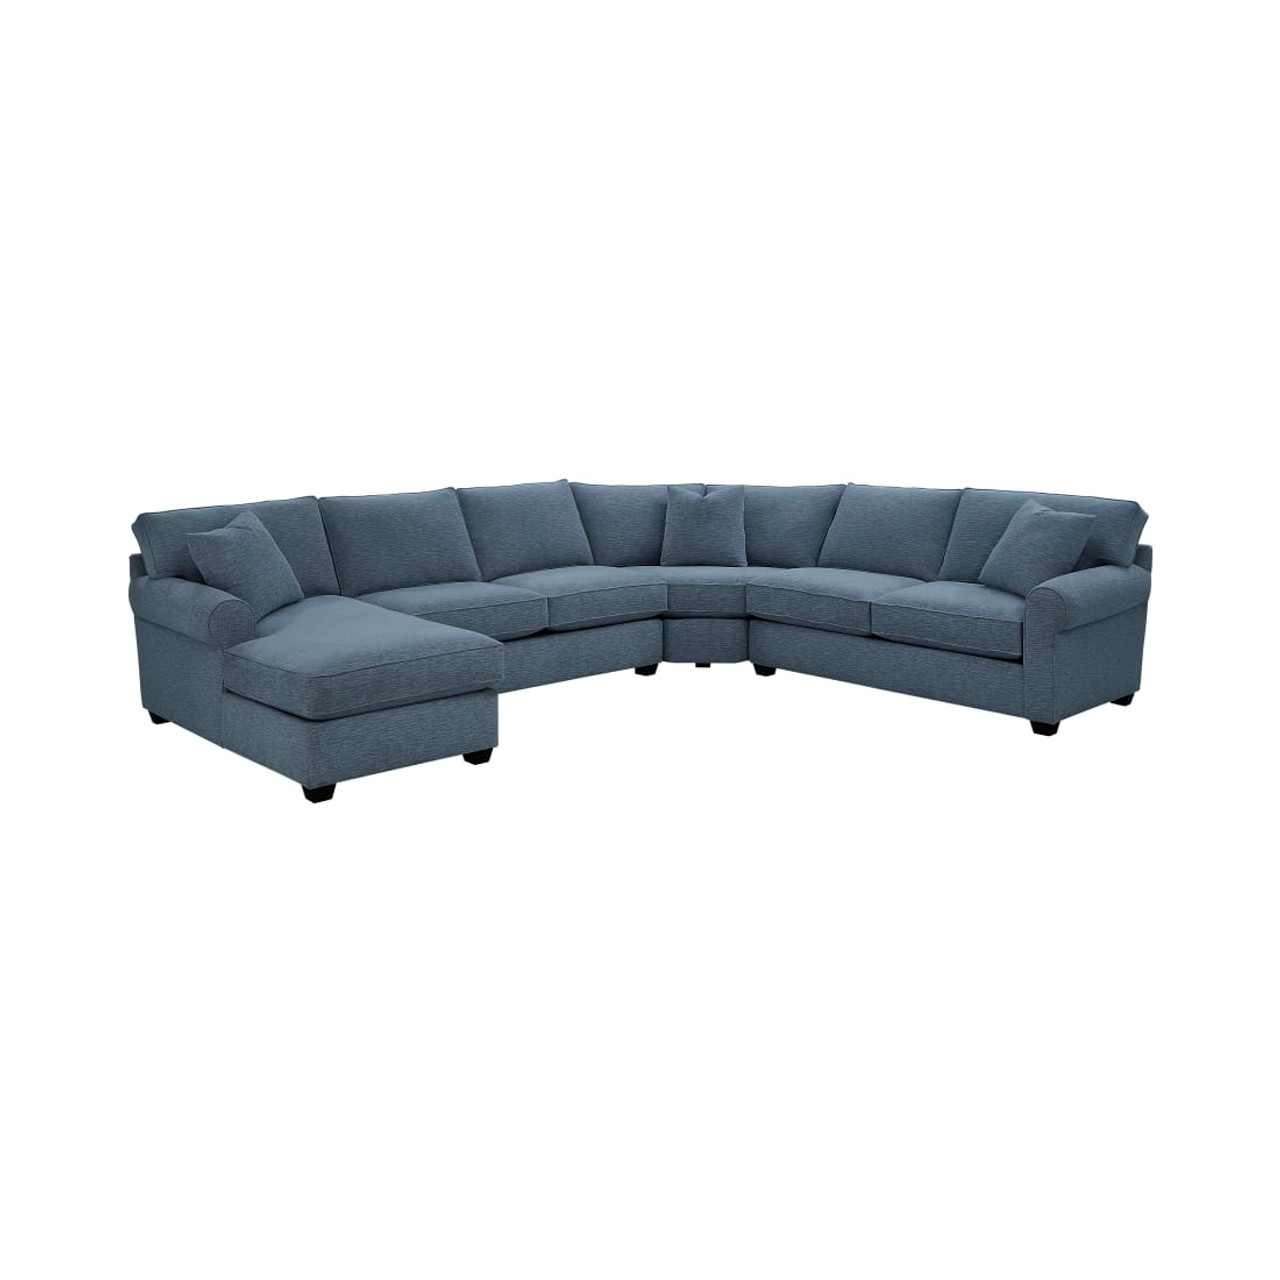 Crestview Rolled Arm Blue 4-pc sectional w/ left chaise